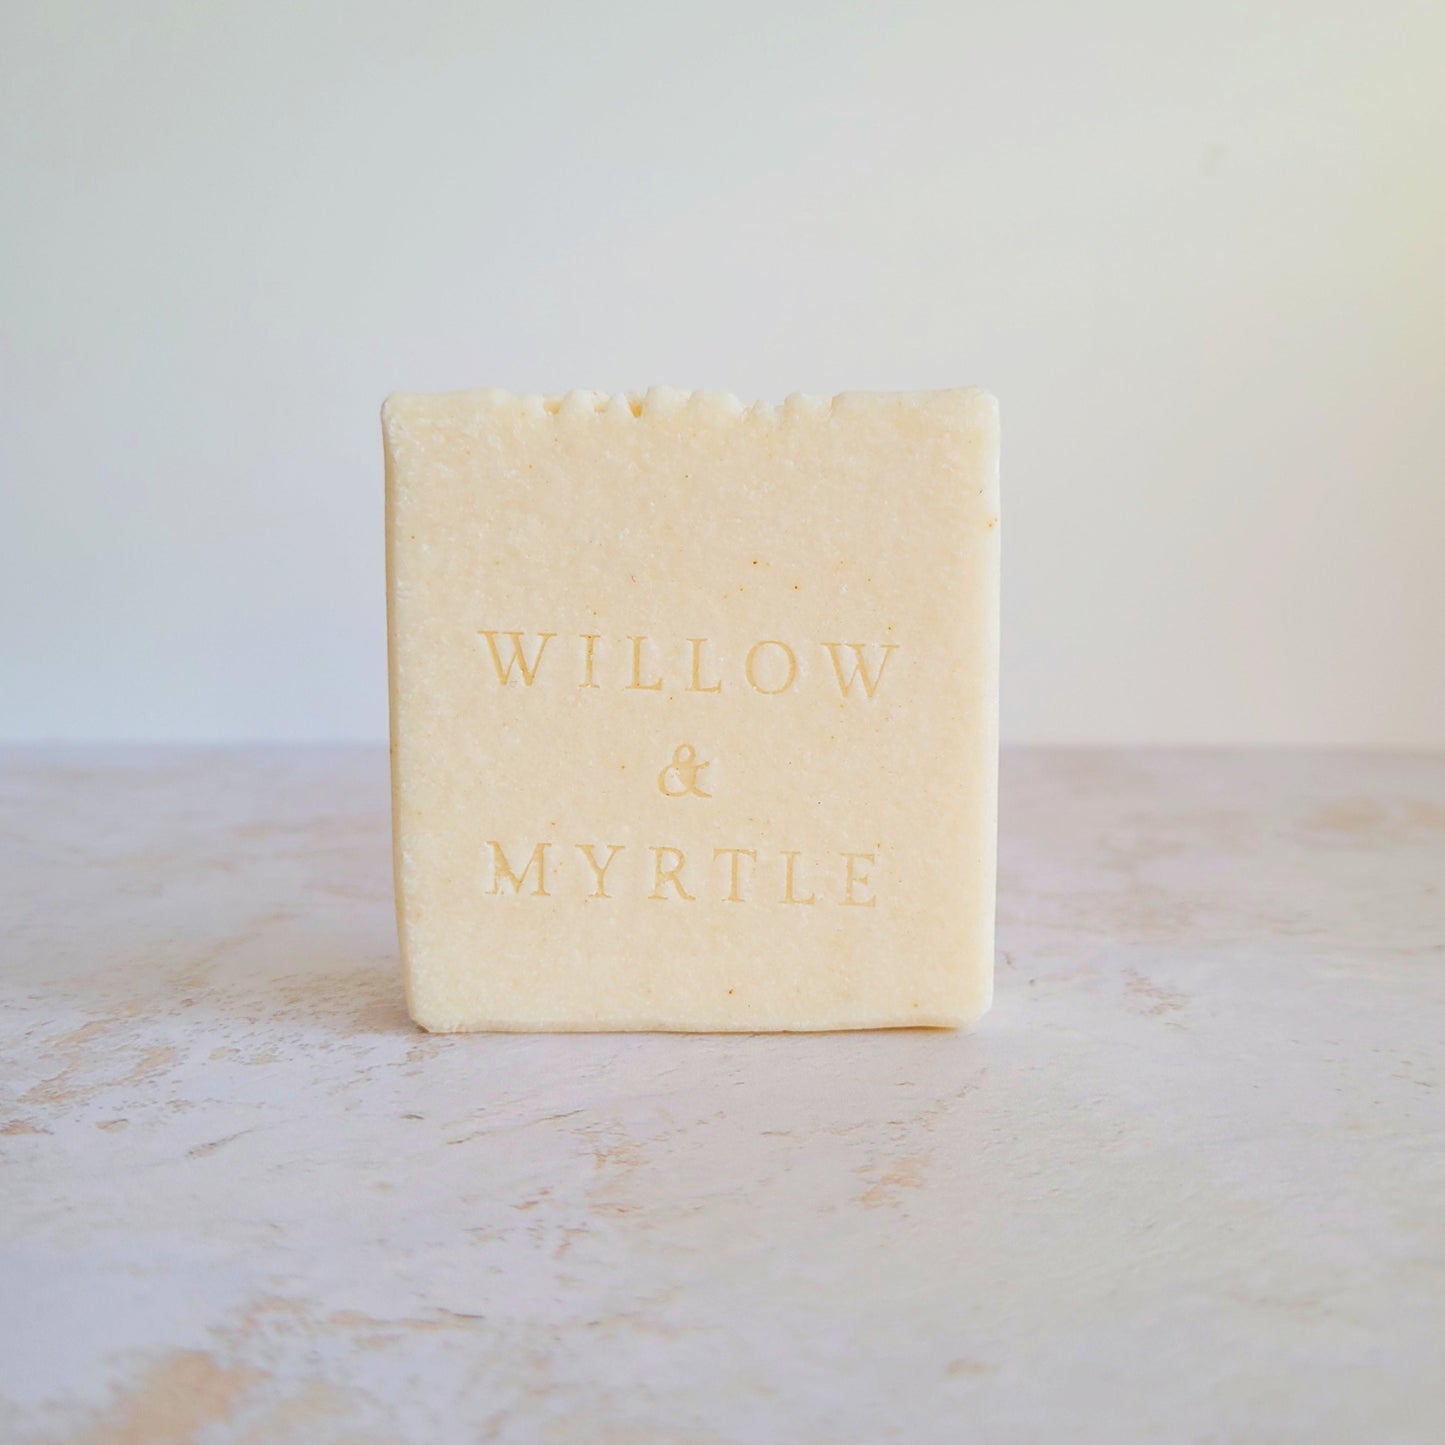 turmeric salt soap. spa bar scented with lemongrass. square soap bar pale yellow